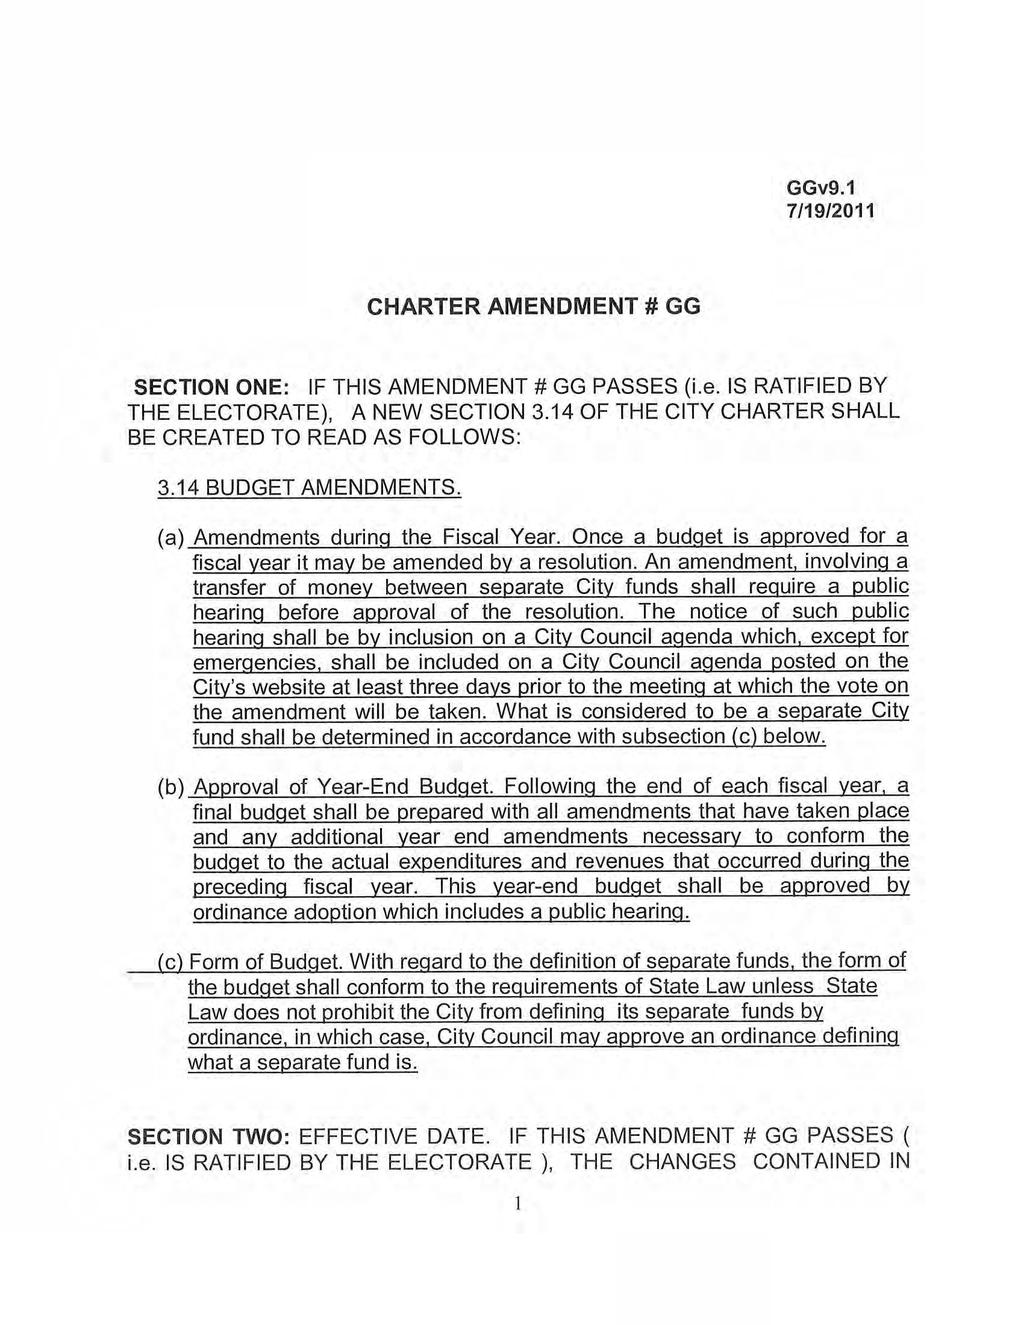 GGv9.1 7/19/2011 CHARTER AMENDMENT# GG SECTION ONE: IF THIS AMENDMENT# GG PASSES (i.e. IS RATIFIED BY THE ELECTORATE), A NEW SECTION 3.14 OF THE CITY CHARTER SHALL BE CREATED TO READ AS FOLLOWS: 3.